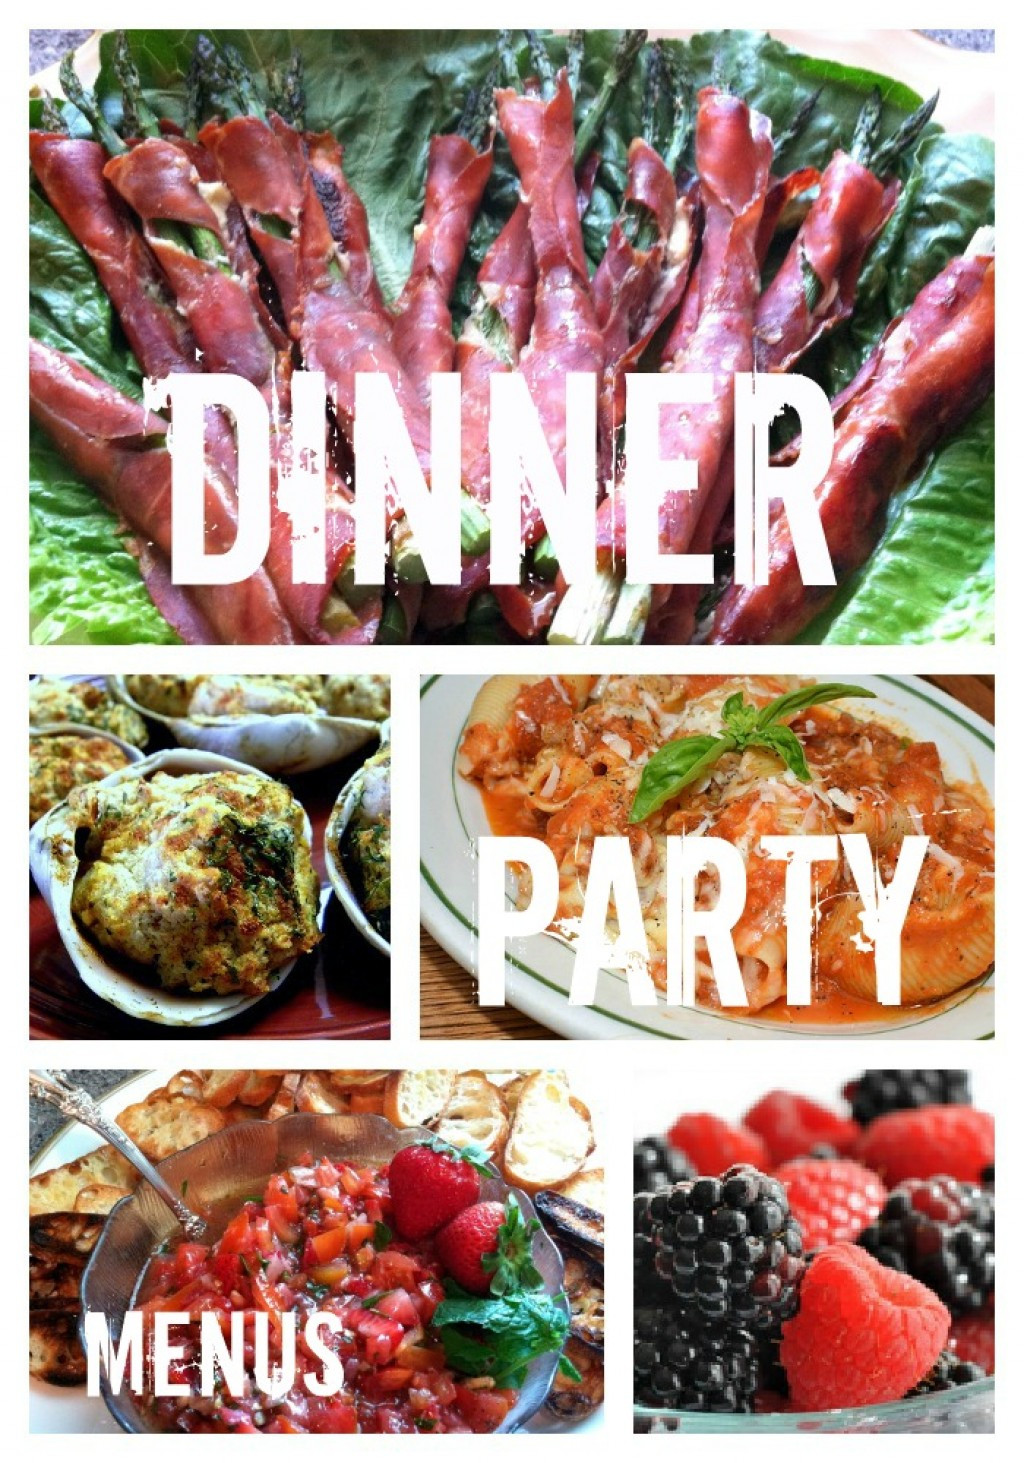 Dinner Party Menu Ideas Food
 Dinner Party Recipes